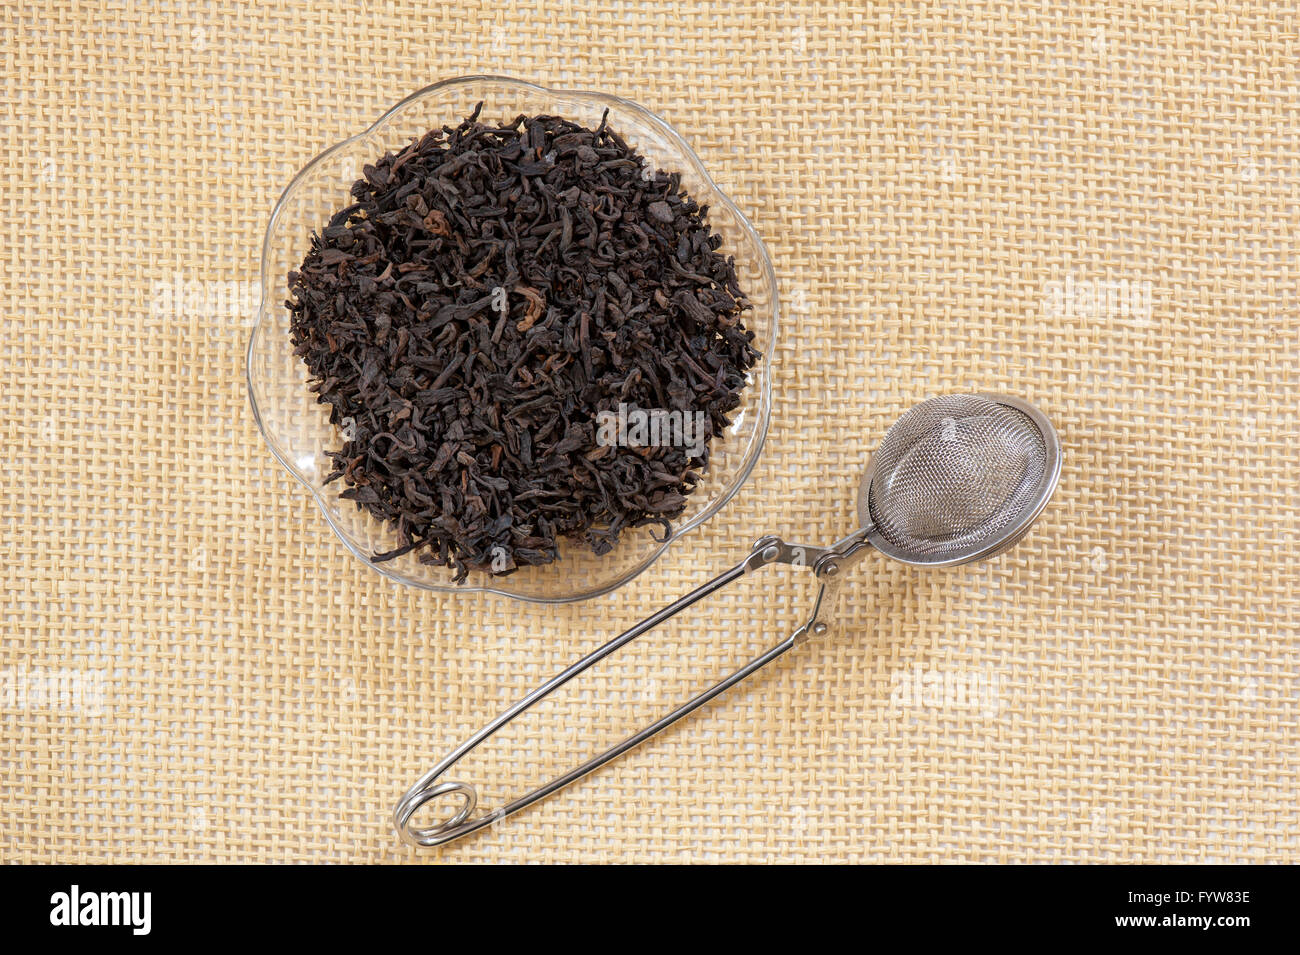 Pu erh dried leaves portion lying on glass saucer and empty metal mesh tea infuser teaball on mat, dry raw healthy plant foliage Stock Photo